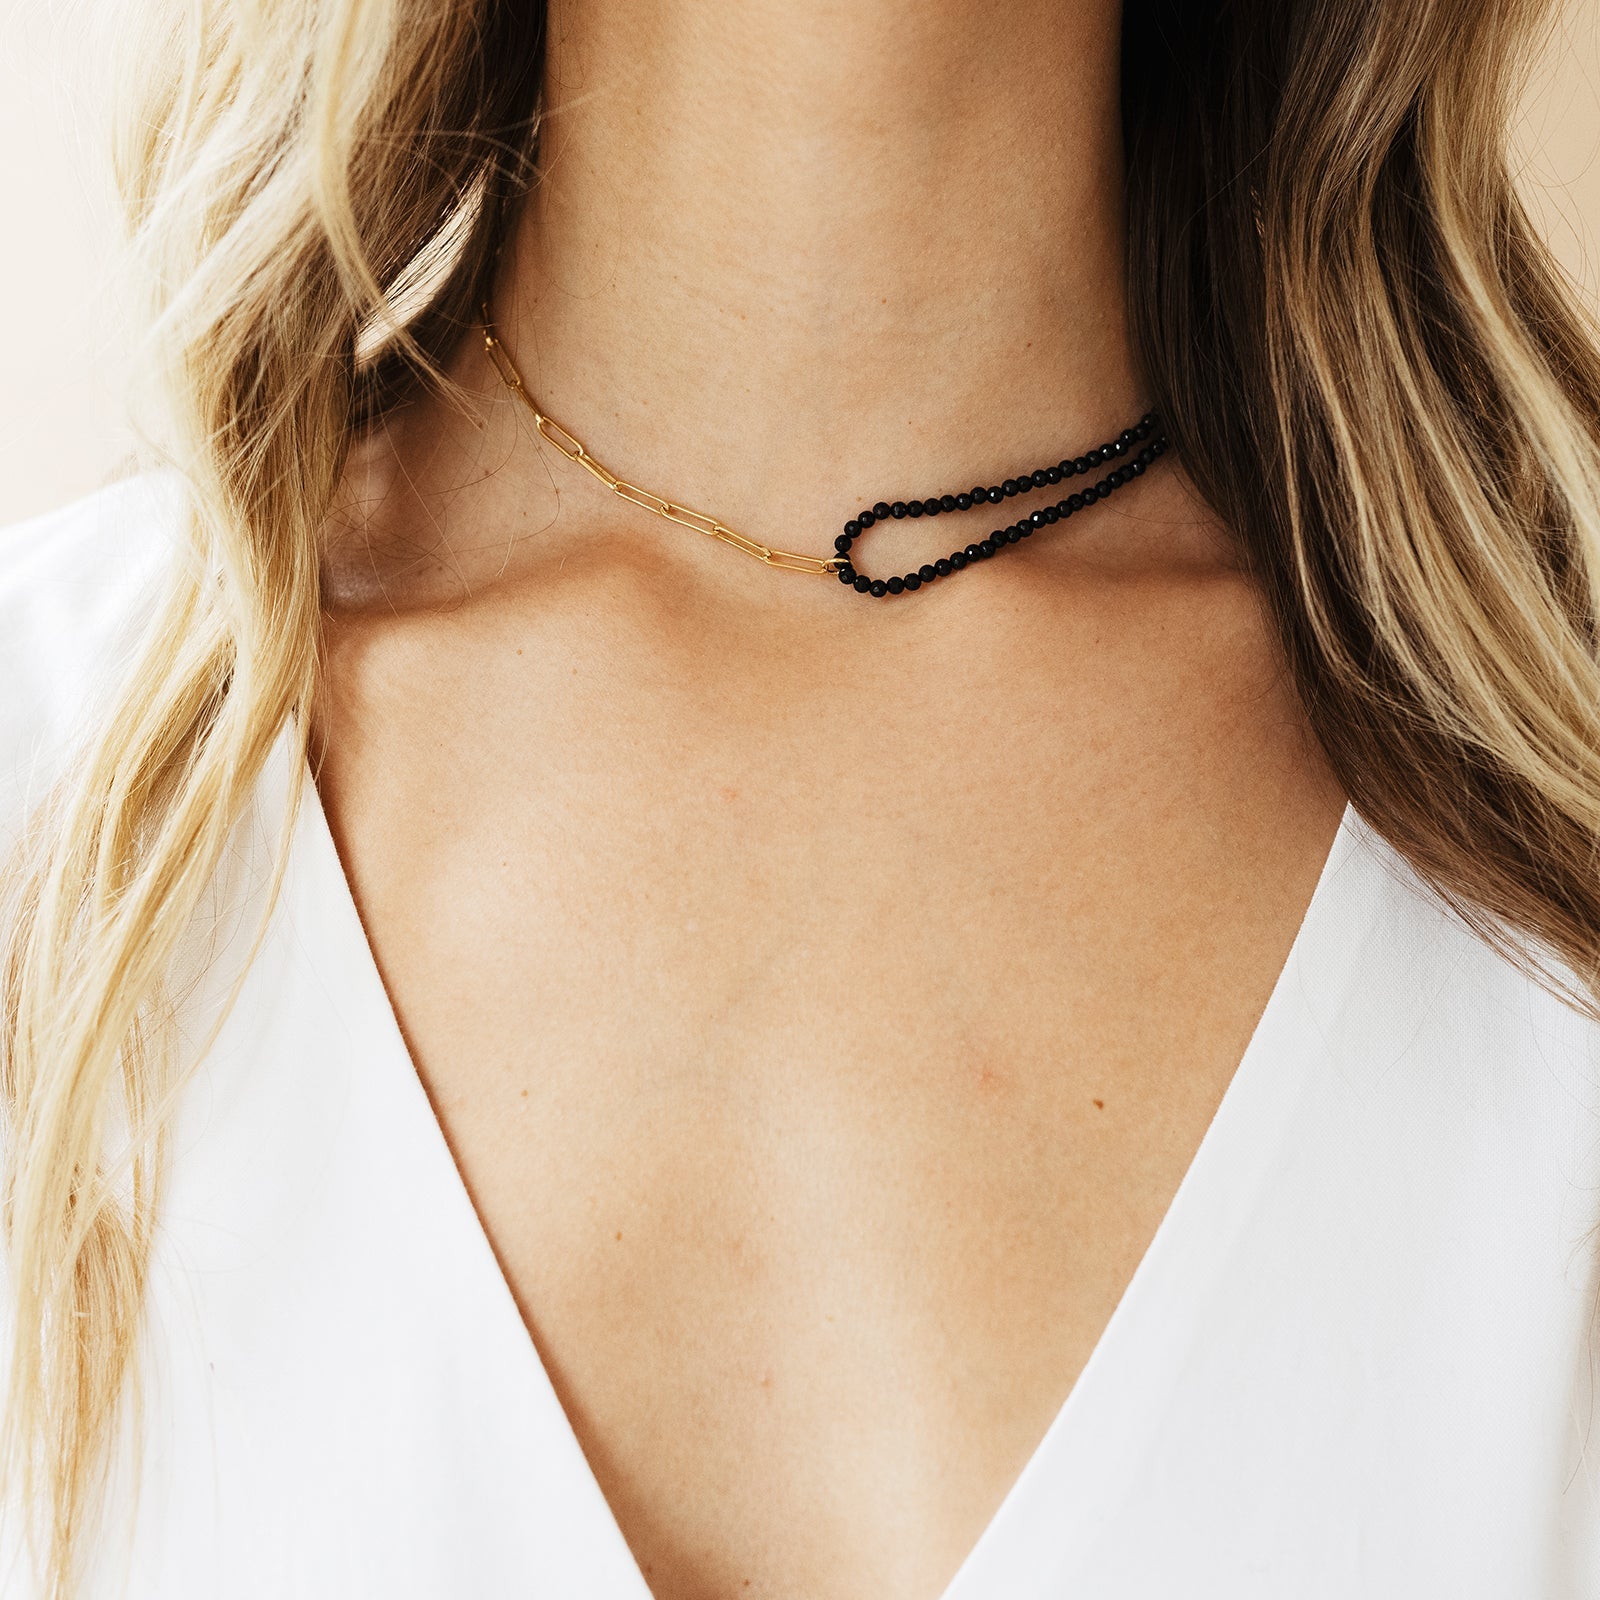 POISE BEADED LINK NECKLACE - BLACK ONYX & GOLD - SO PRETTY CARA COTTER